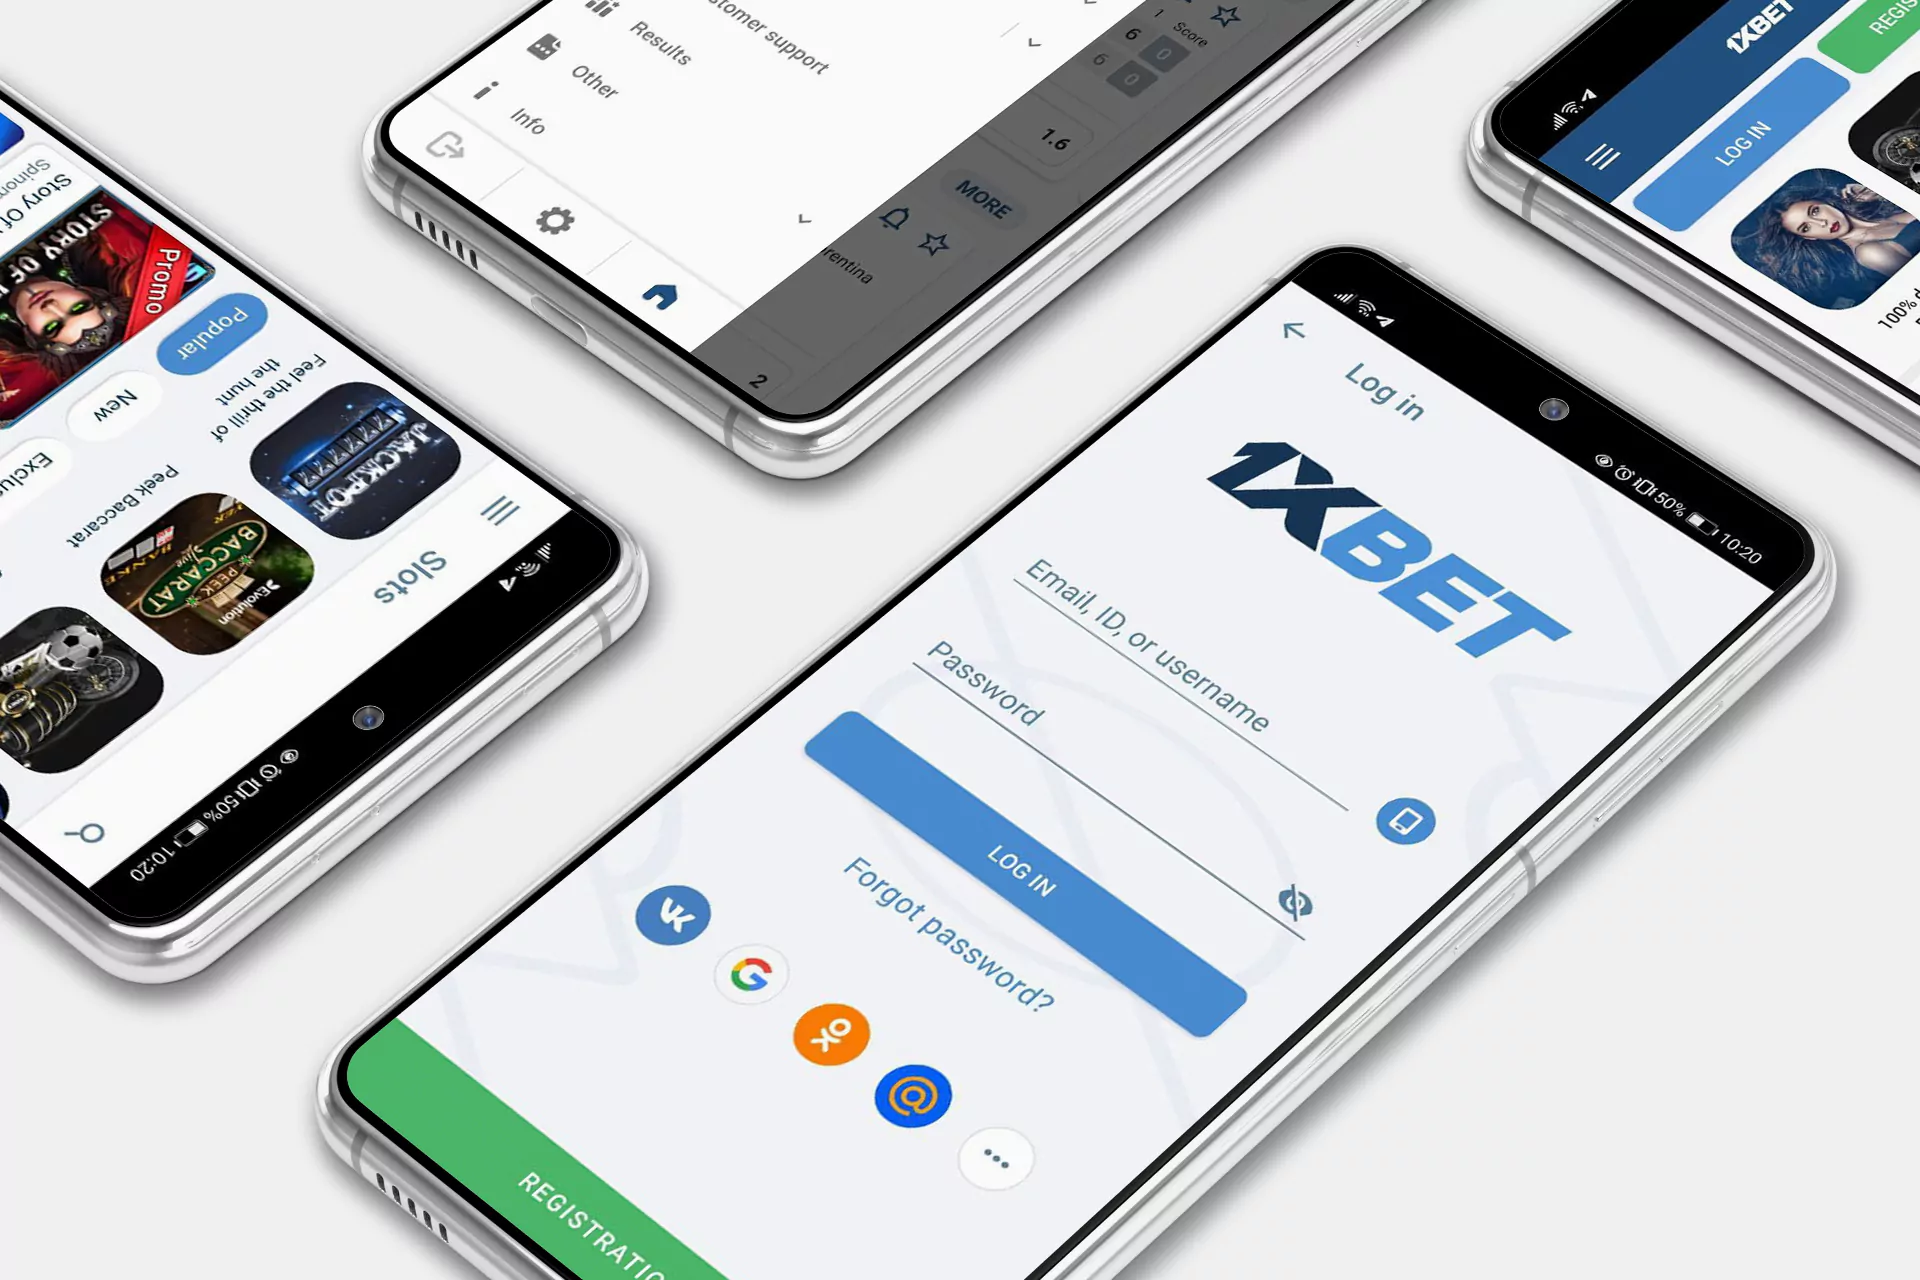 1xBet app is available on most Android smartphones.